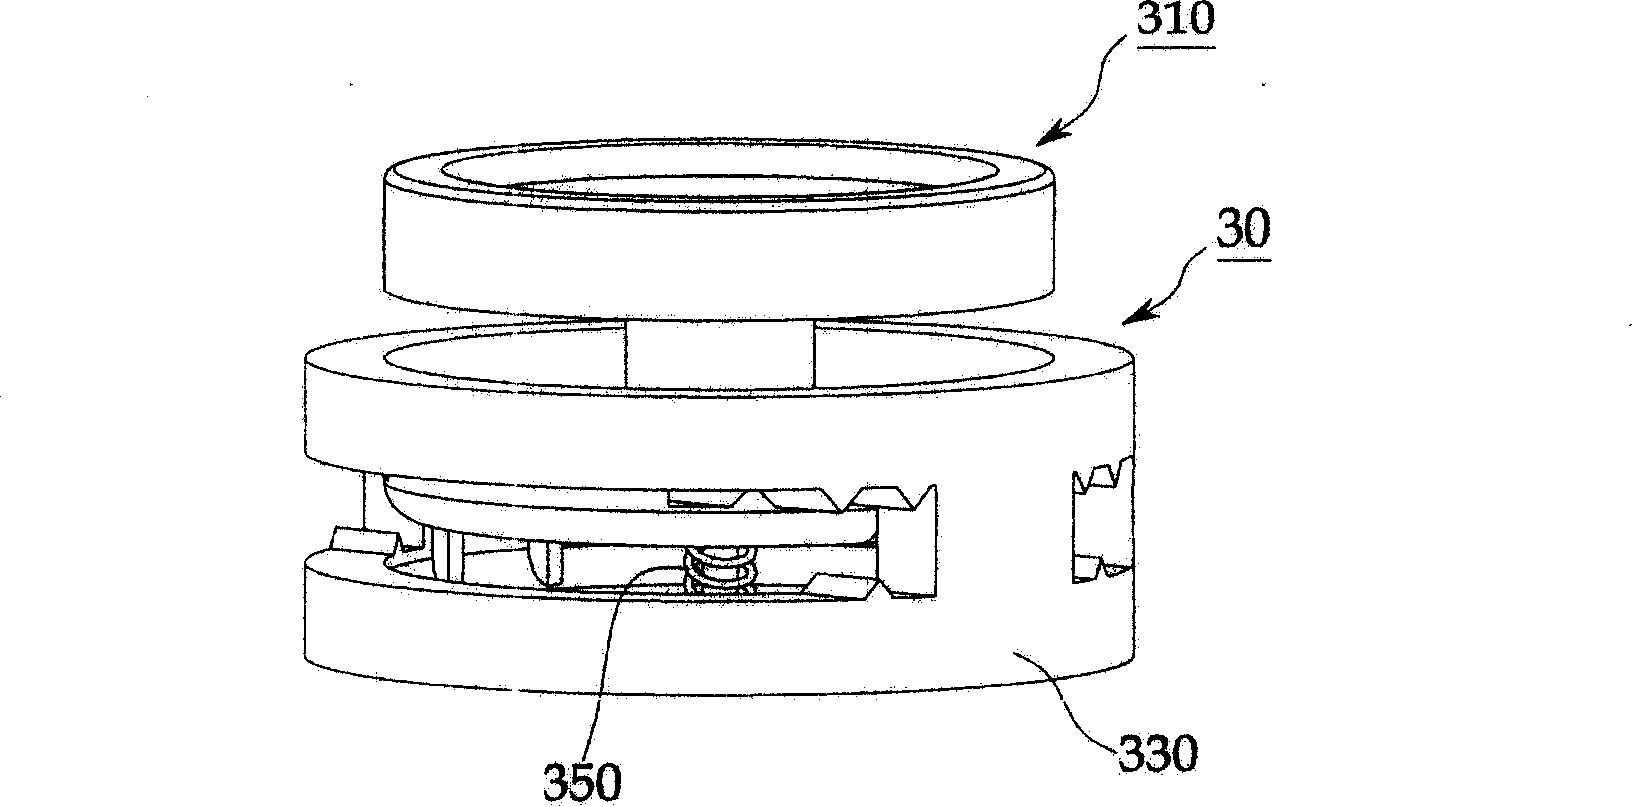 Supporting apparatus for flower arrangement